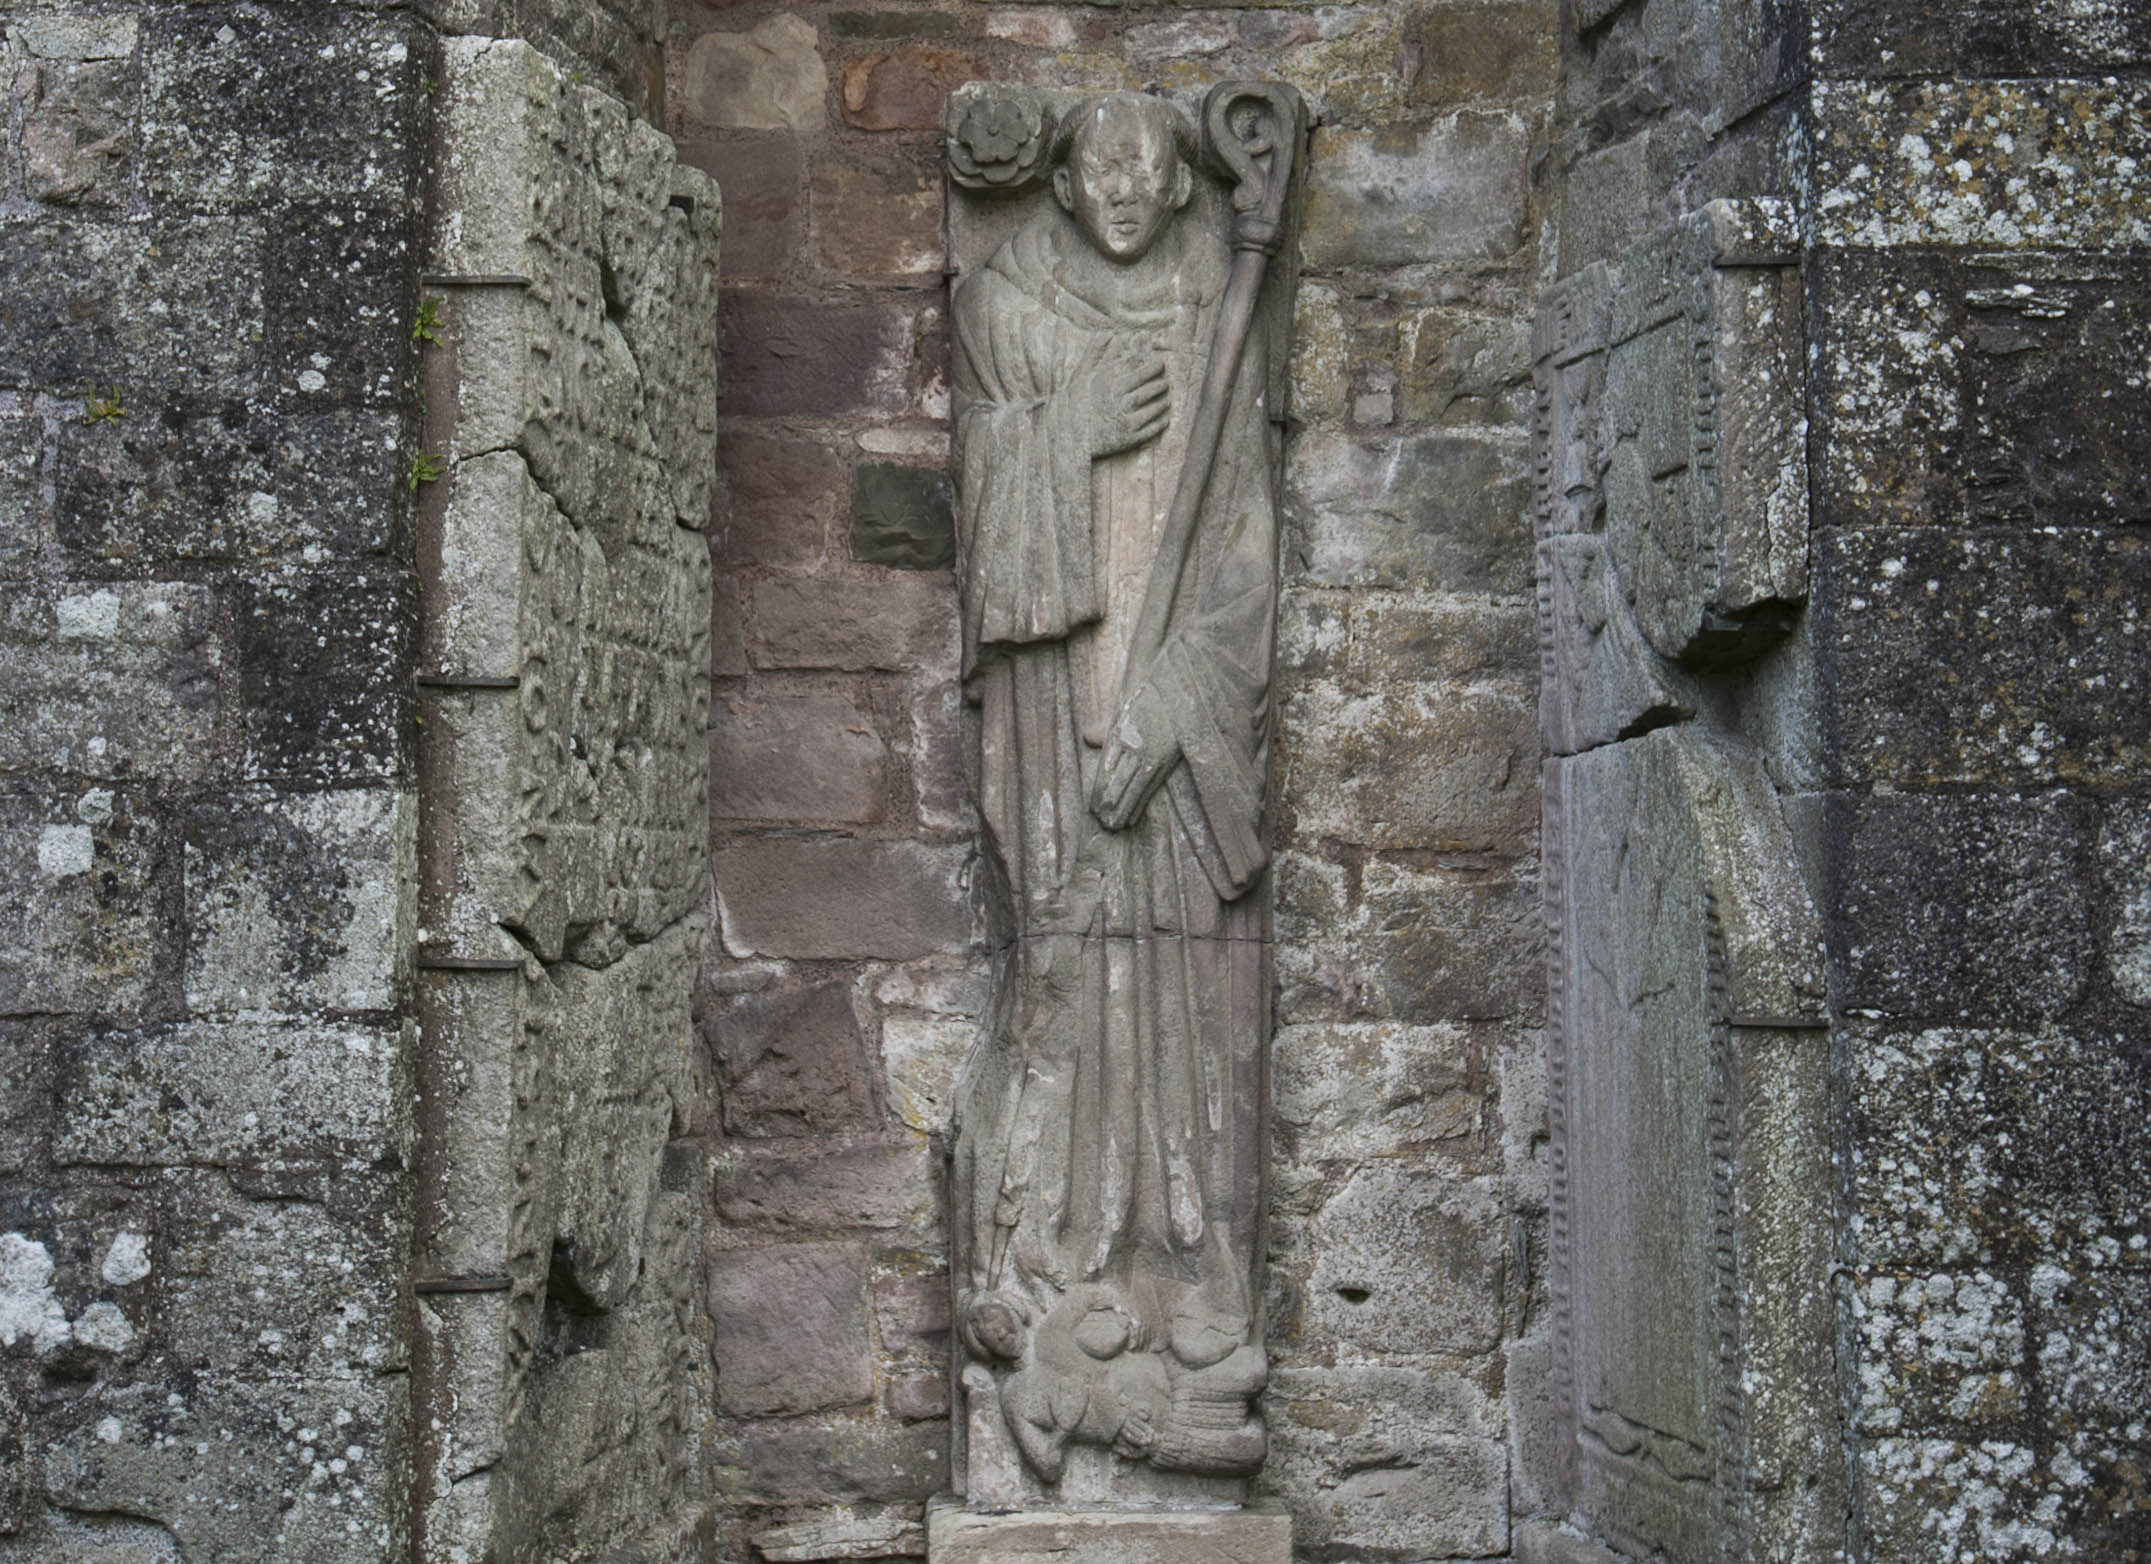  Effigy of an unknown abbot of Dundrennan. The dagger at his haert, along wih the partly disembowelled figure at his geet, has been taken to suggest that this abbot was murdered.